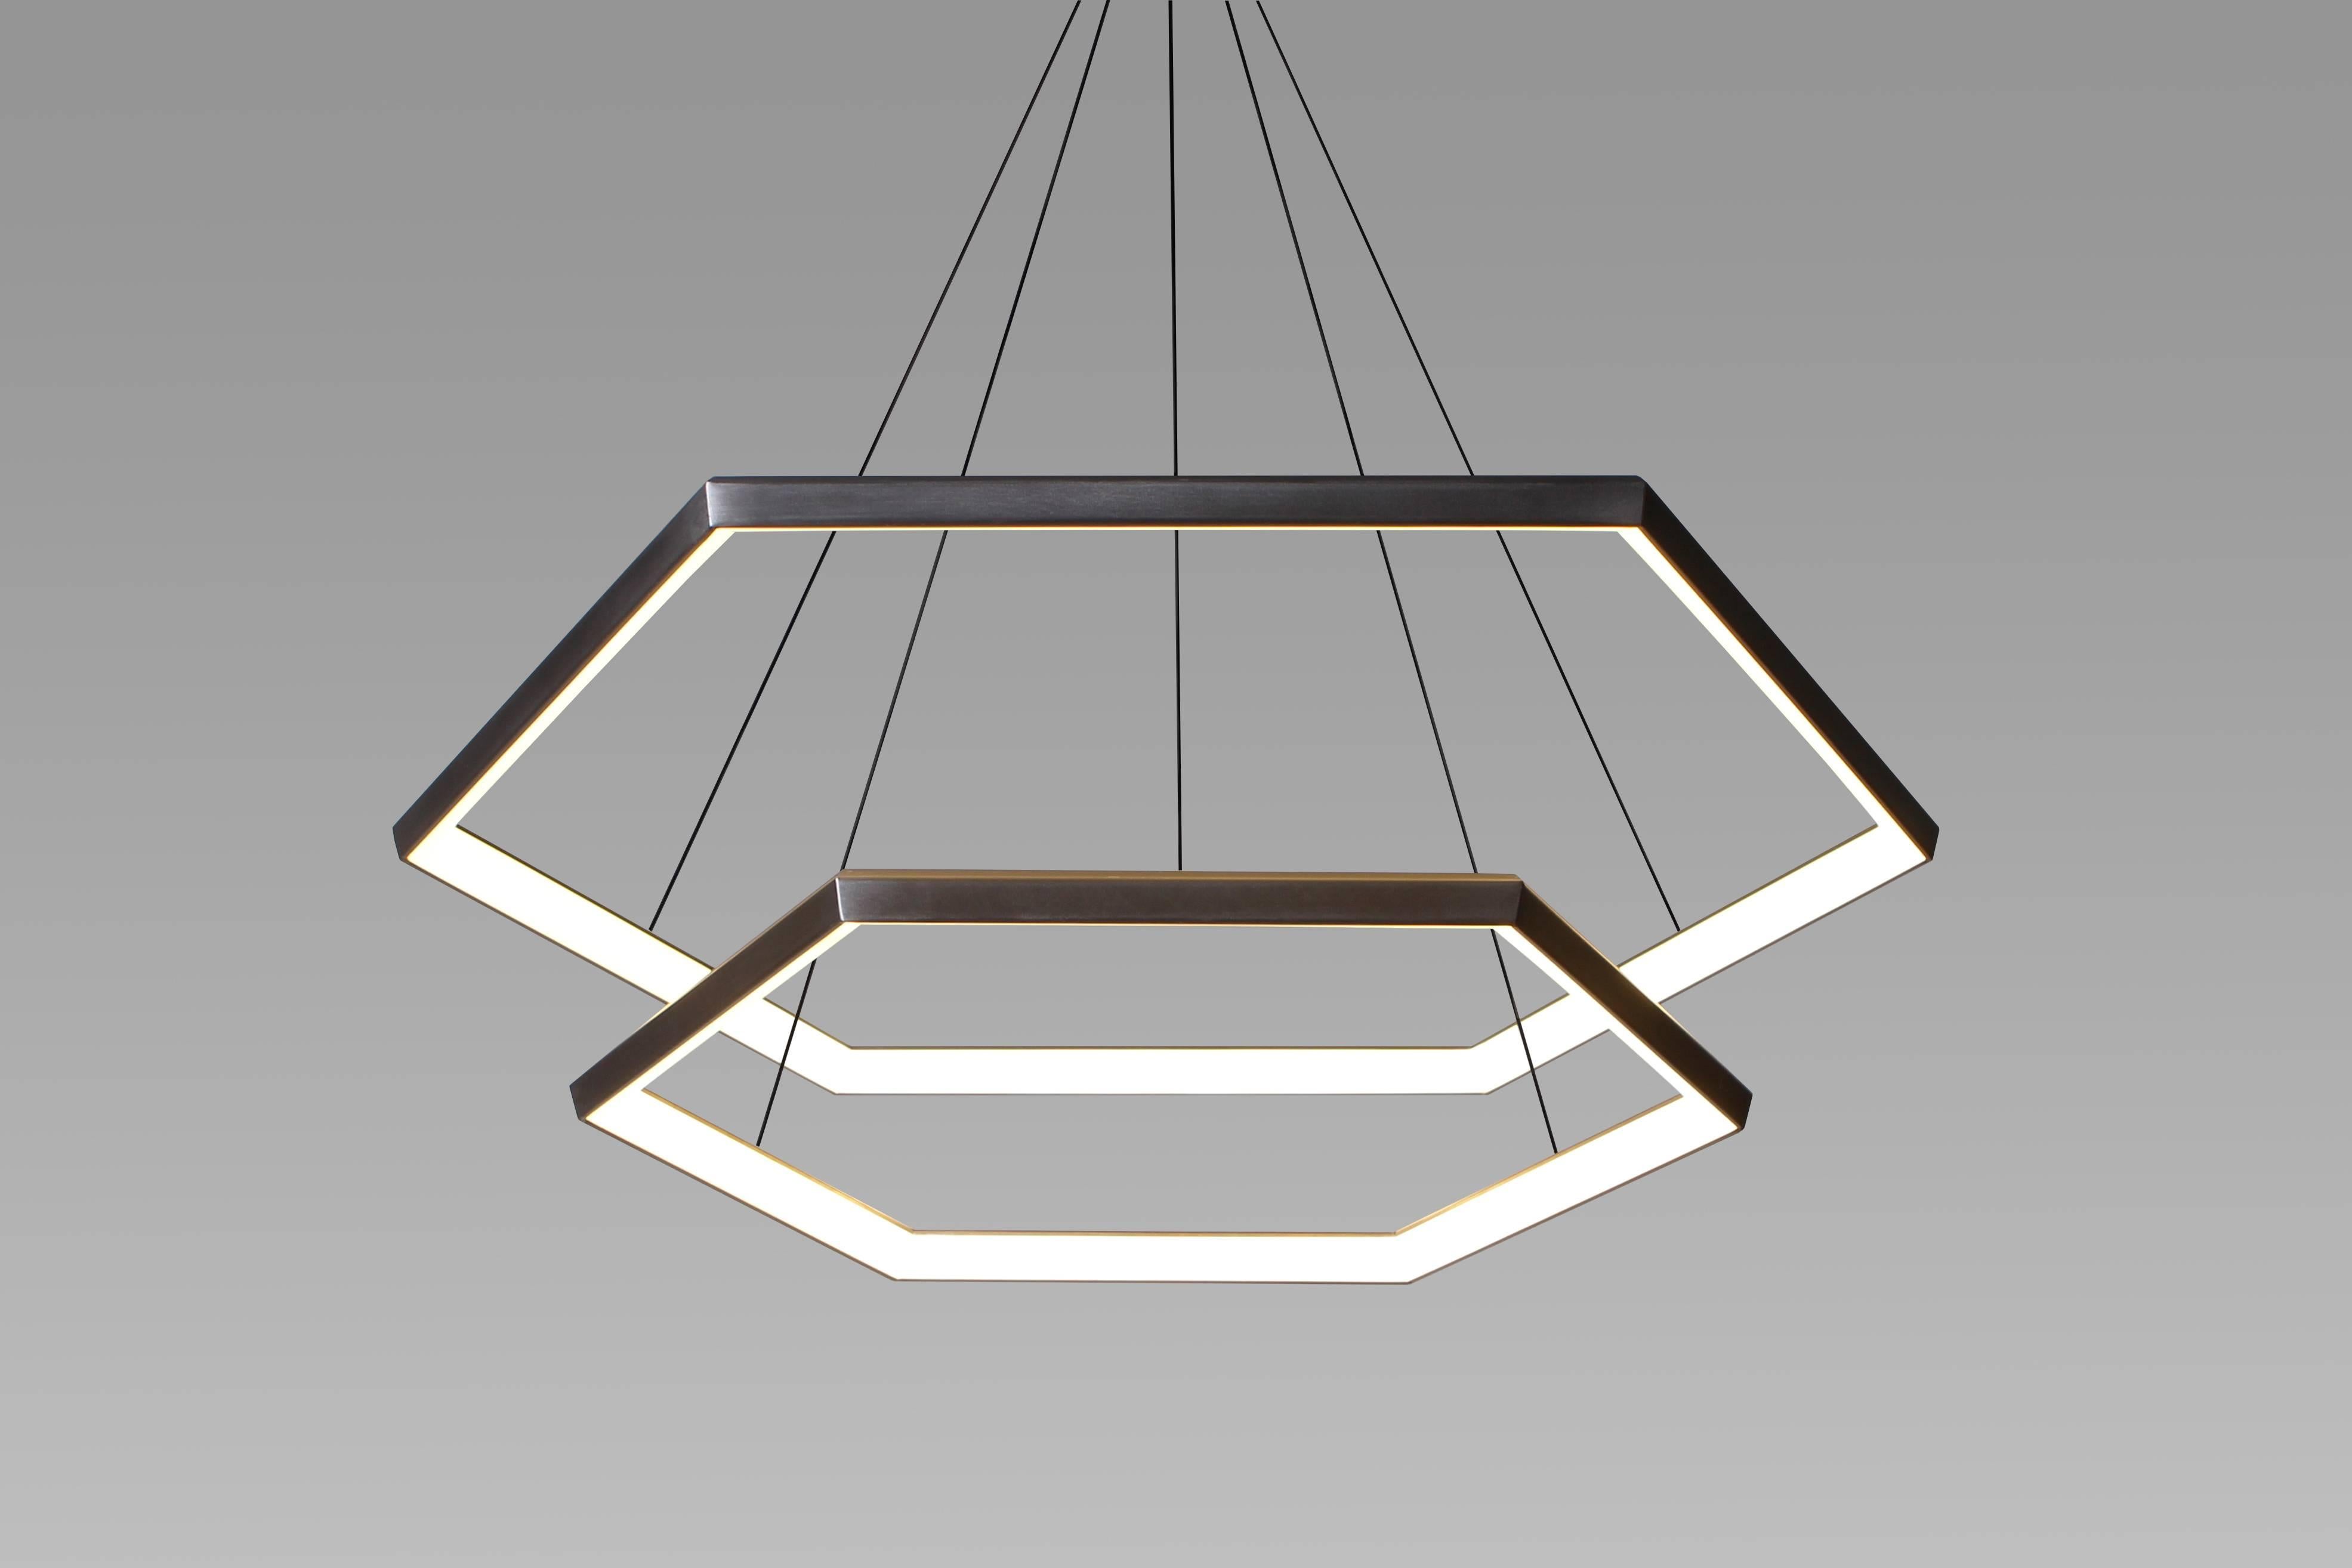 Cascade HX46 is a hexagonal light fixture from Studio Endo. Suspended effortlessly one above the other, delicate convex hexagonal forms create a sleek and modern chandelier.

The centerpiece of a room, Cascade descends from high ceilings in a